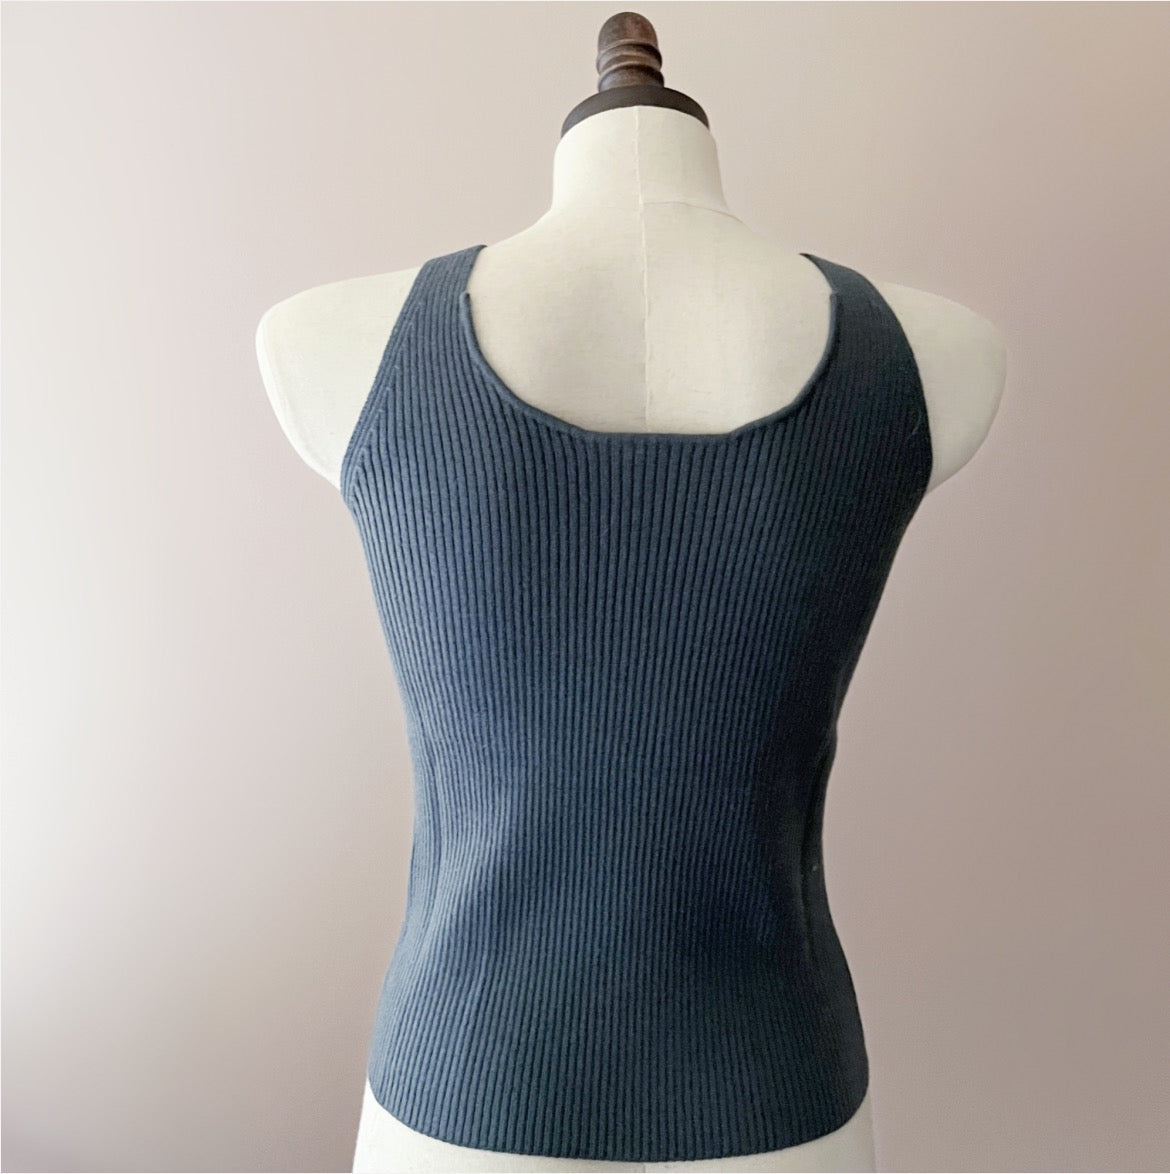 Charcoal grey merino wool tank to for ladies | shop merino wool apparel from Canada 